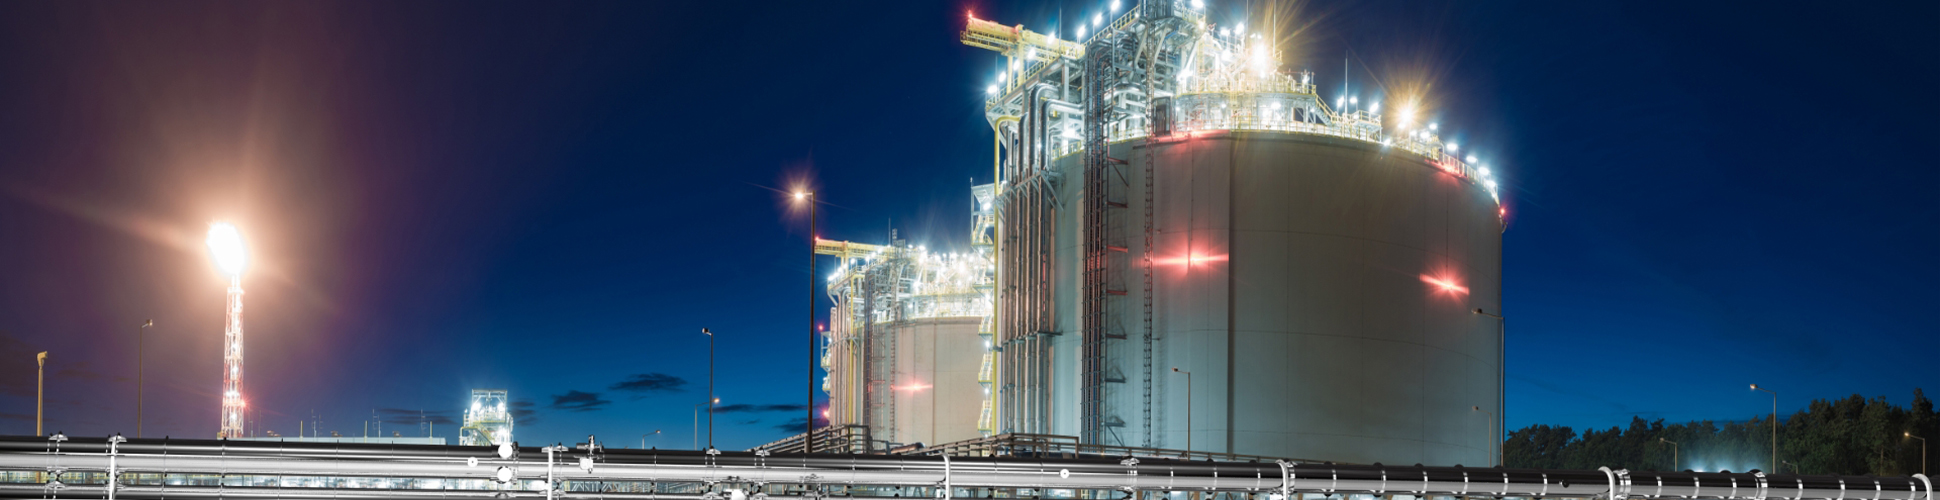 Oil plant at night